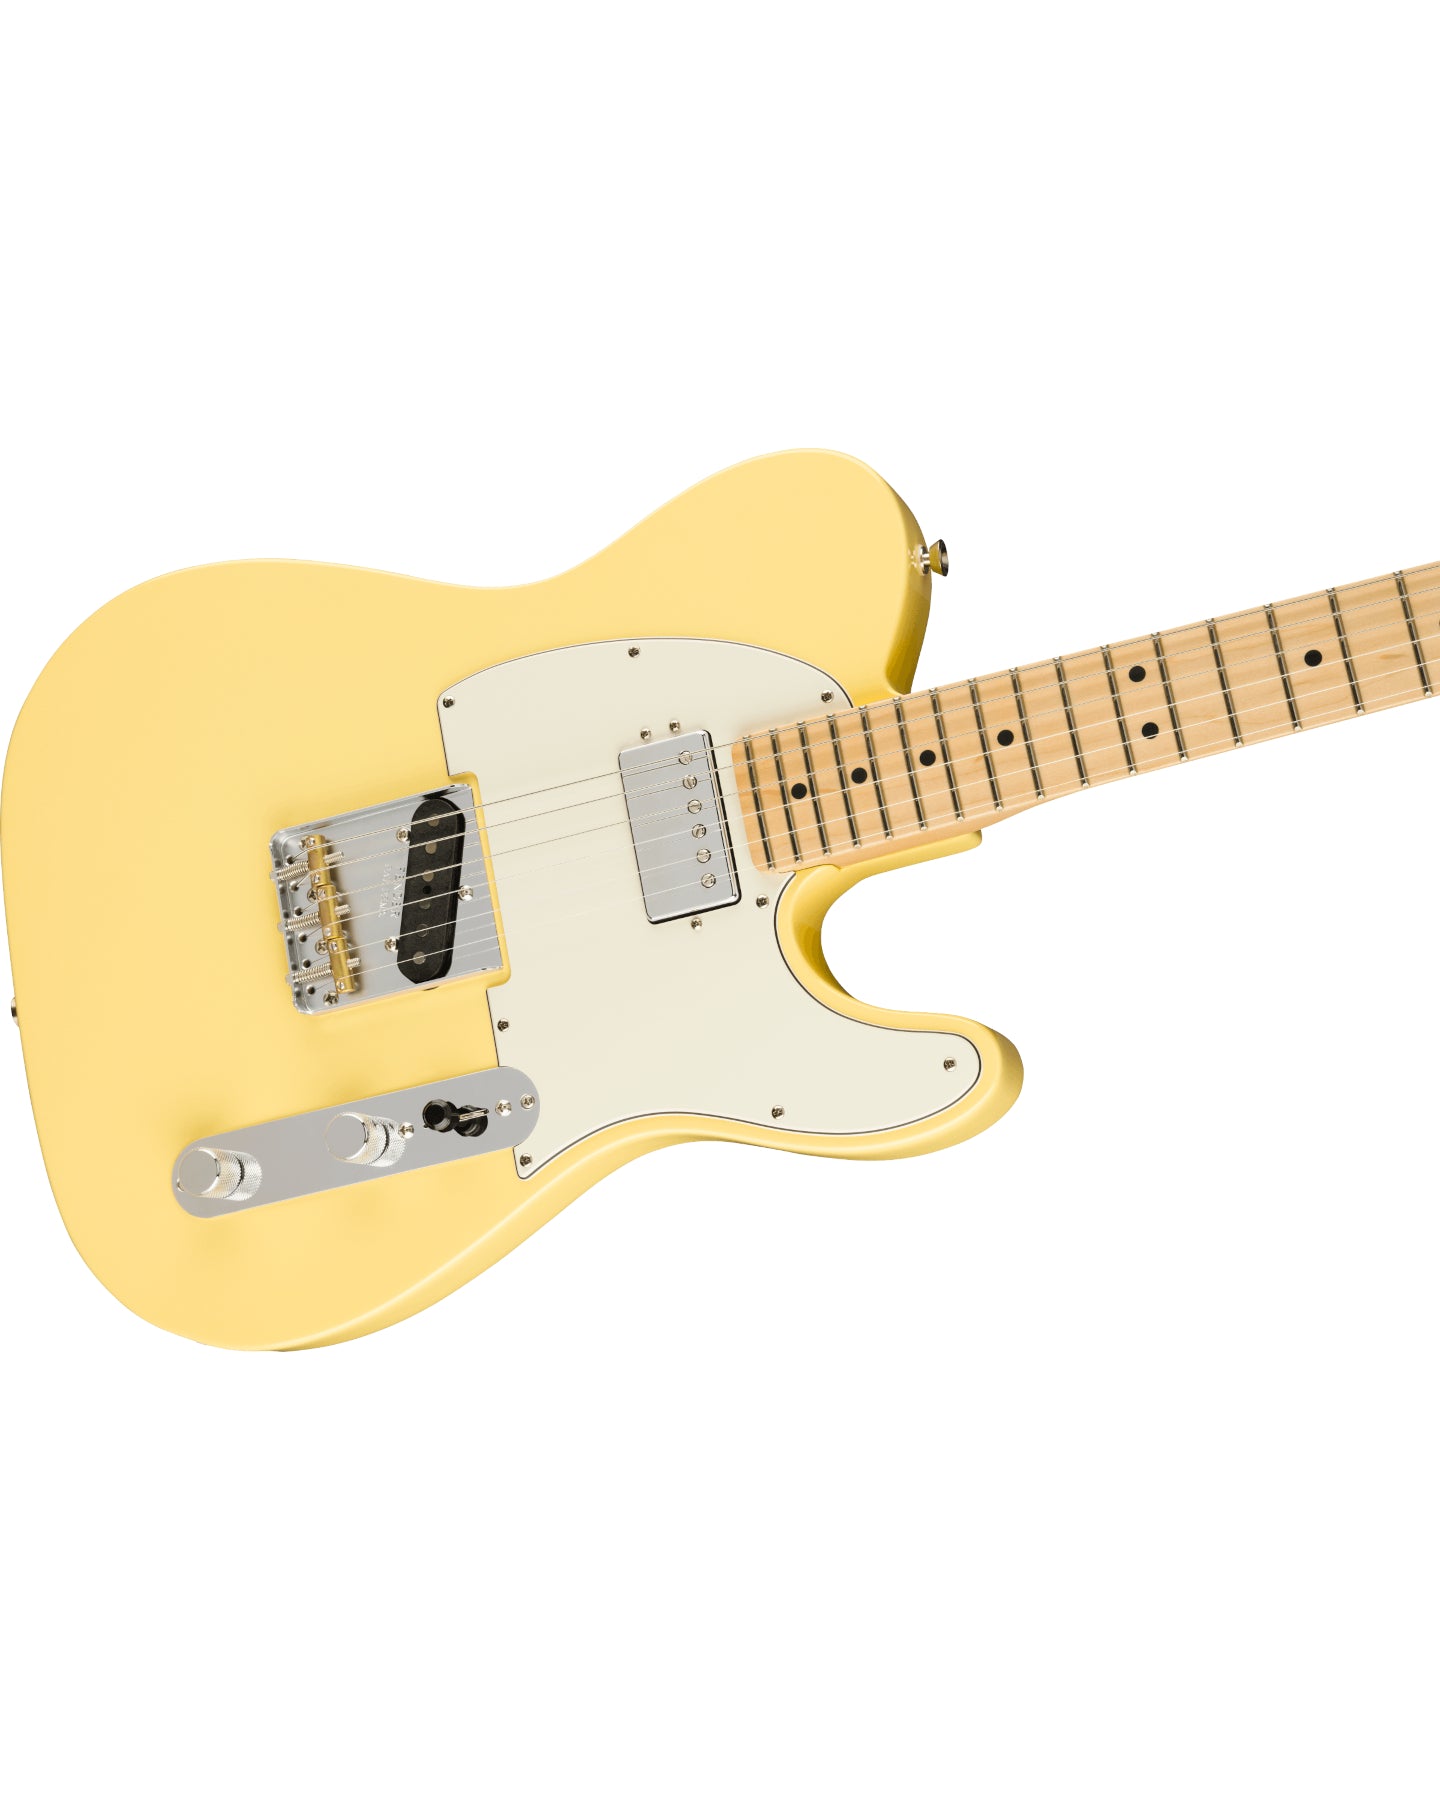 American Performer Telecaster® with Humbucking, Maple Fingerboard, Vintage White